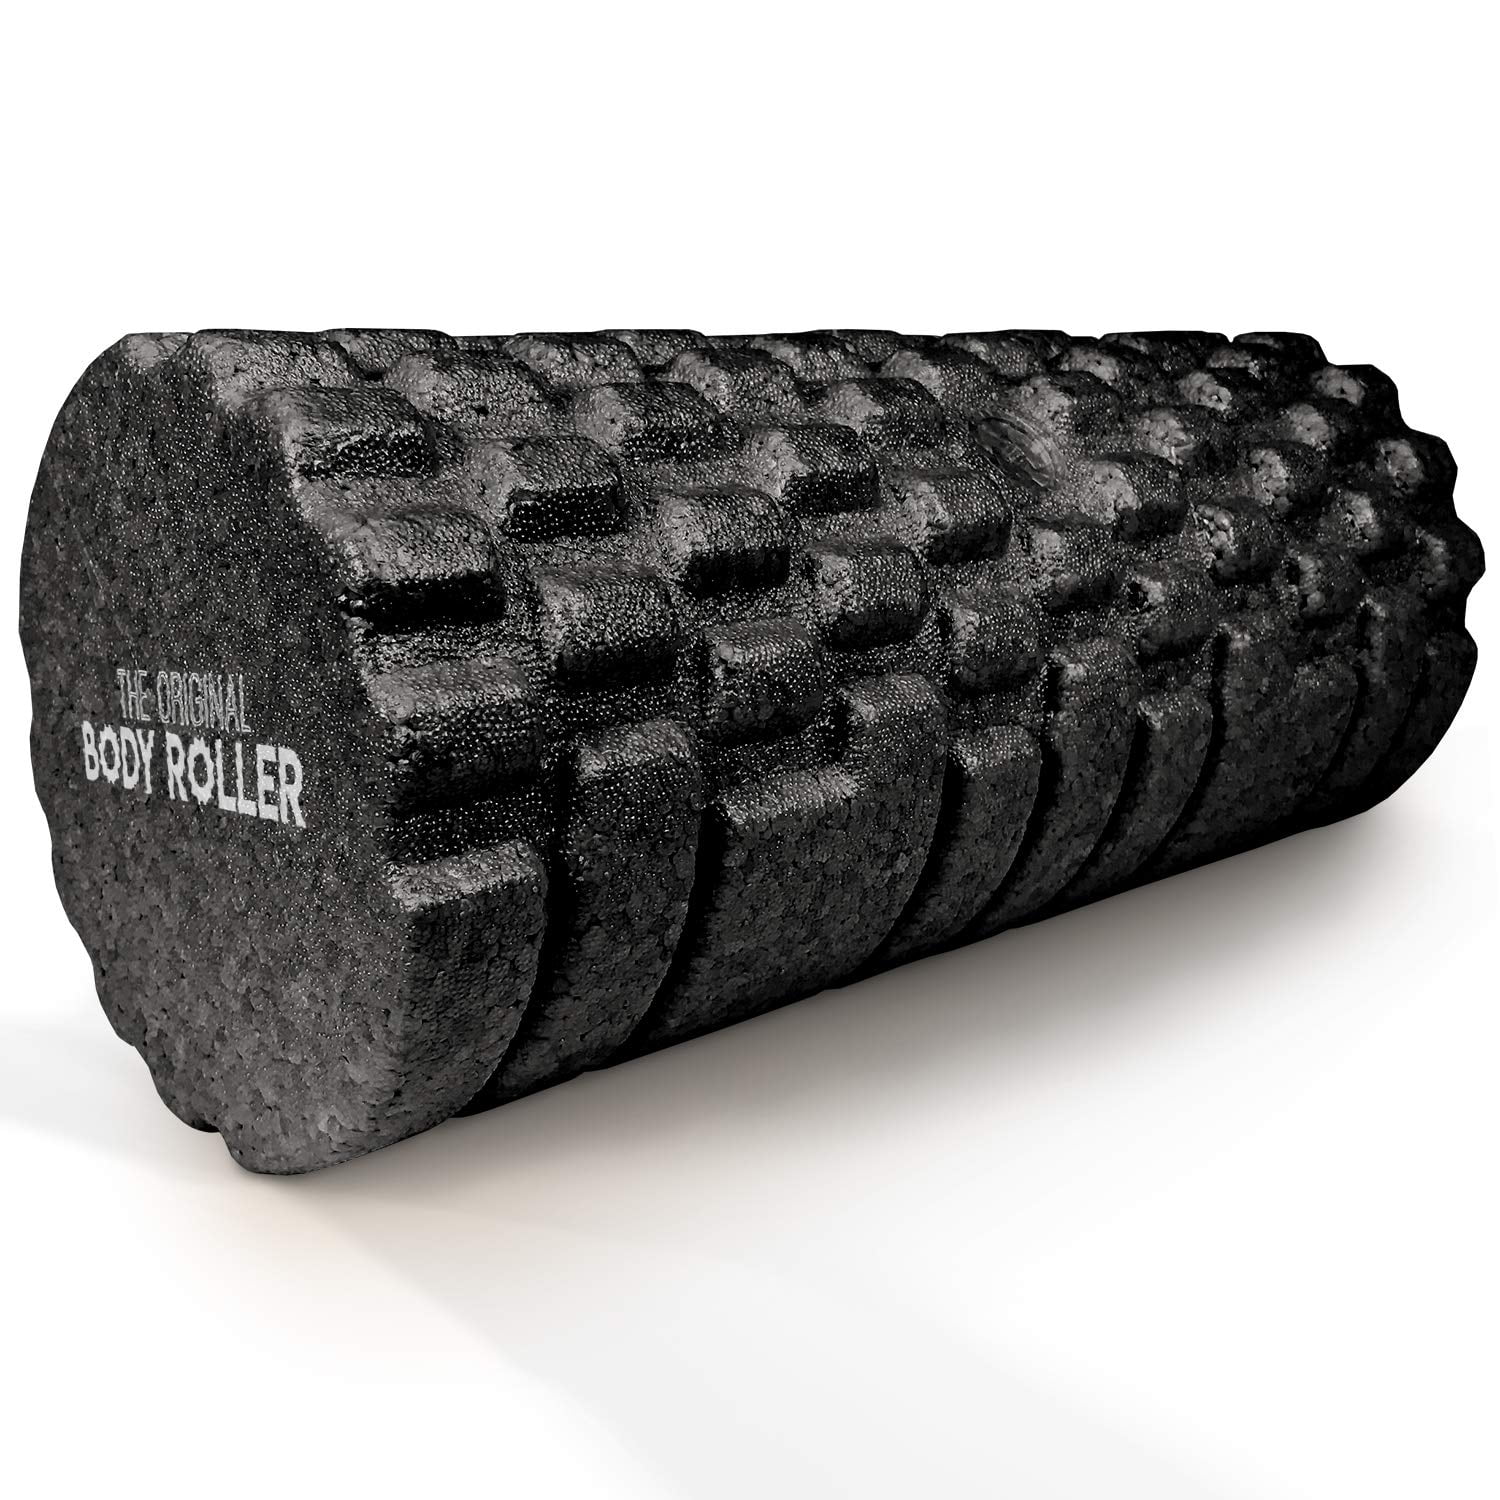 High Density Foam Roller Massager for Deep Tissue Massage of The Back and Leg Muscles Self Myofascial Release of Painful Trigger Point Muscle Adhesions The Original Body Roller 